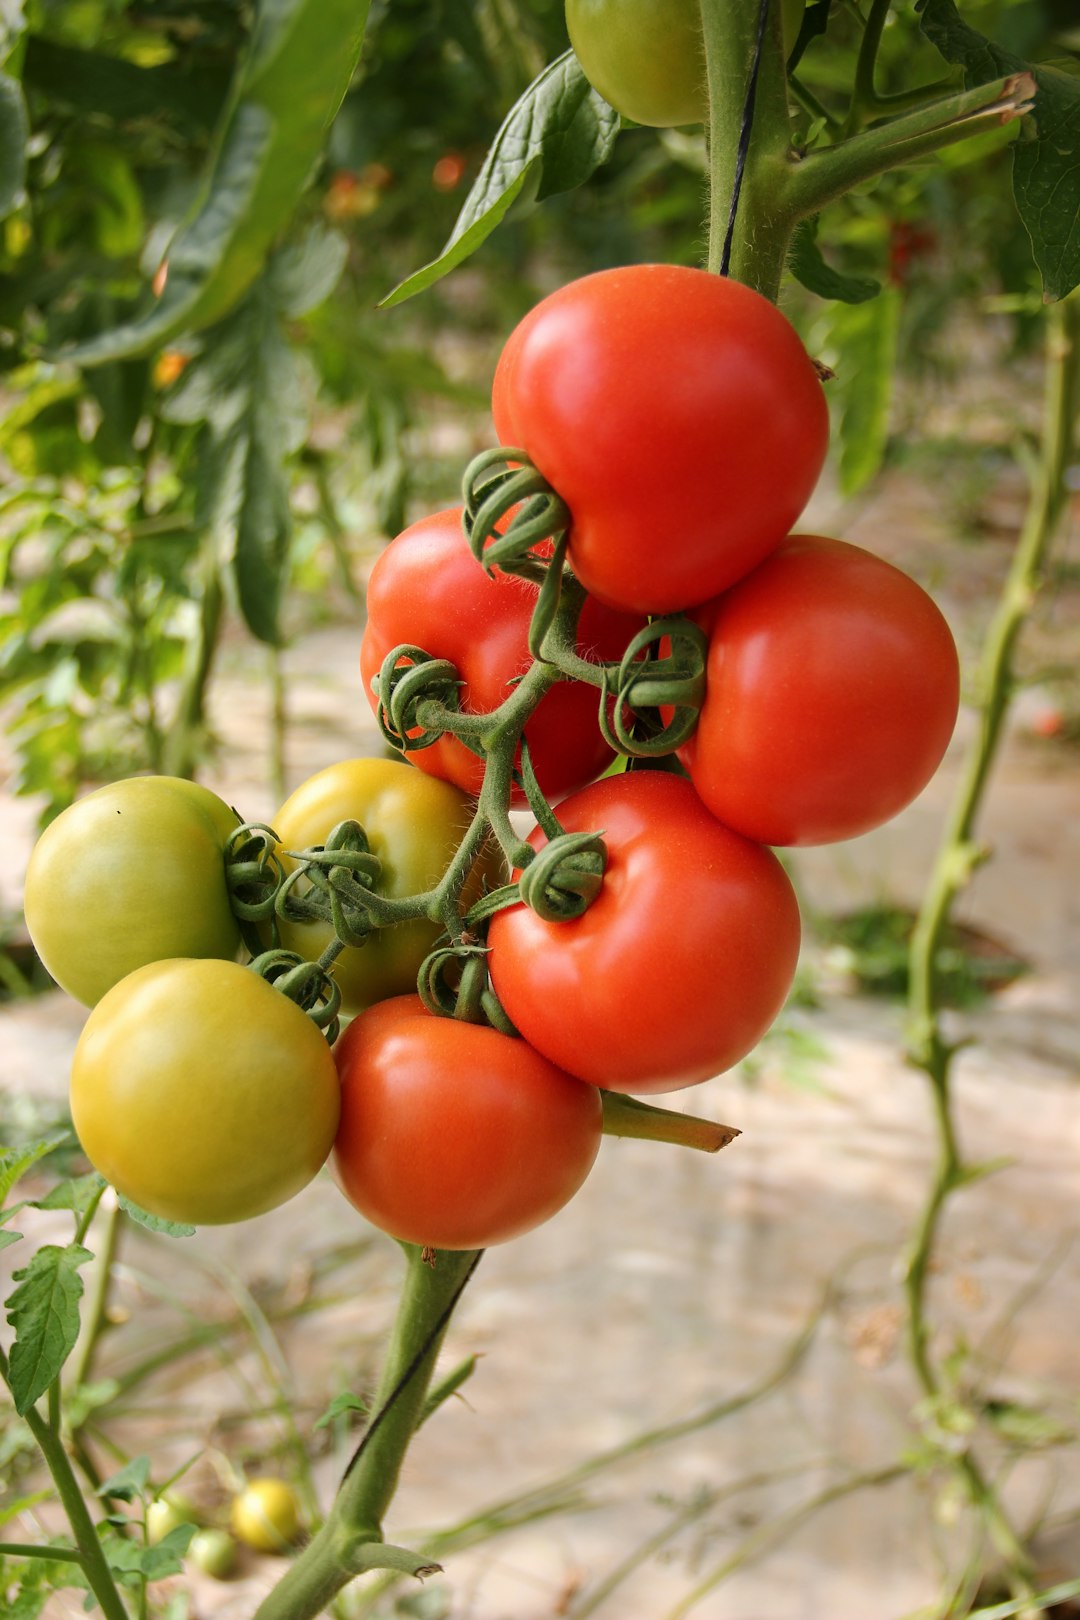 LARGE tomatoes on the vine, five ripe and ready to pick - How To Grow A Tomato Plant That Bears Tomatoes